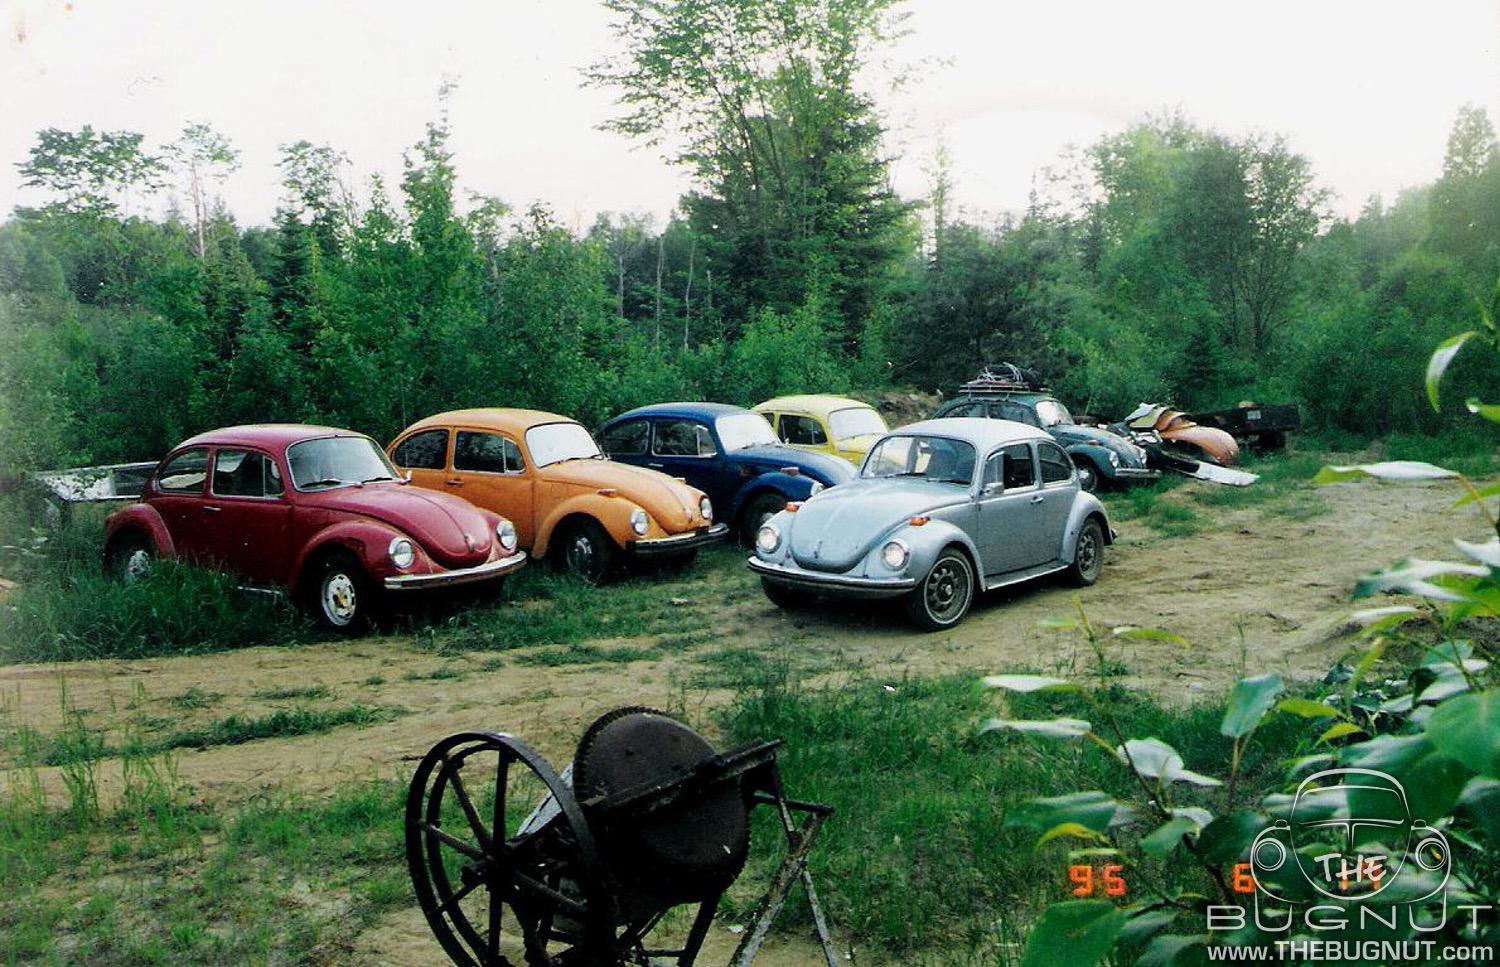 Classic Air-Cooled VW Beetles waiting to be restored